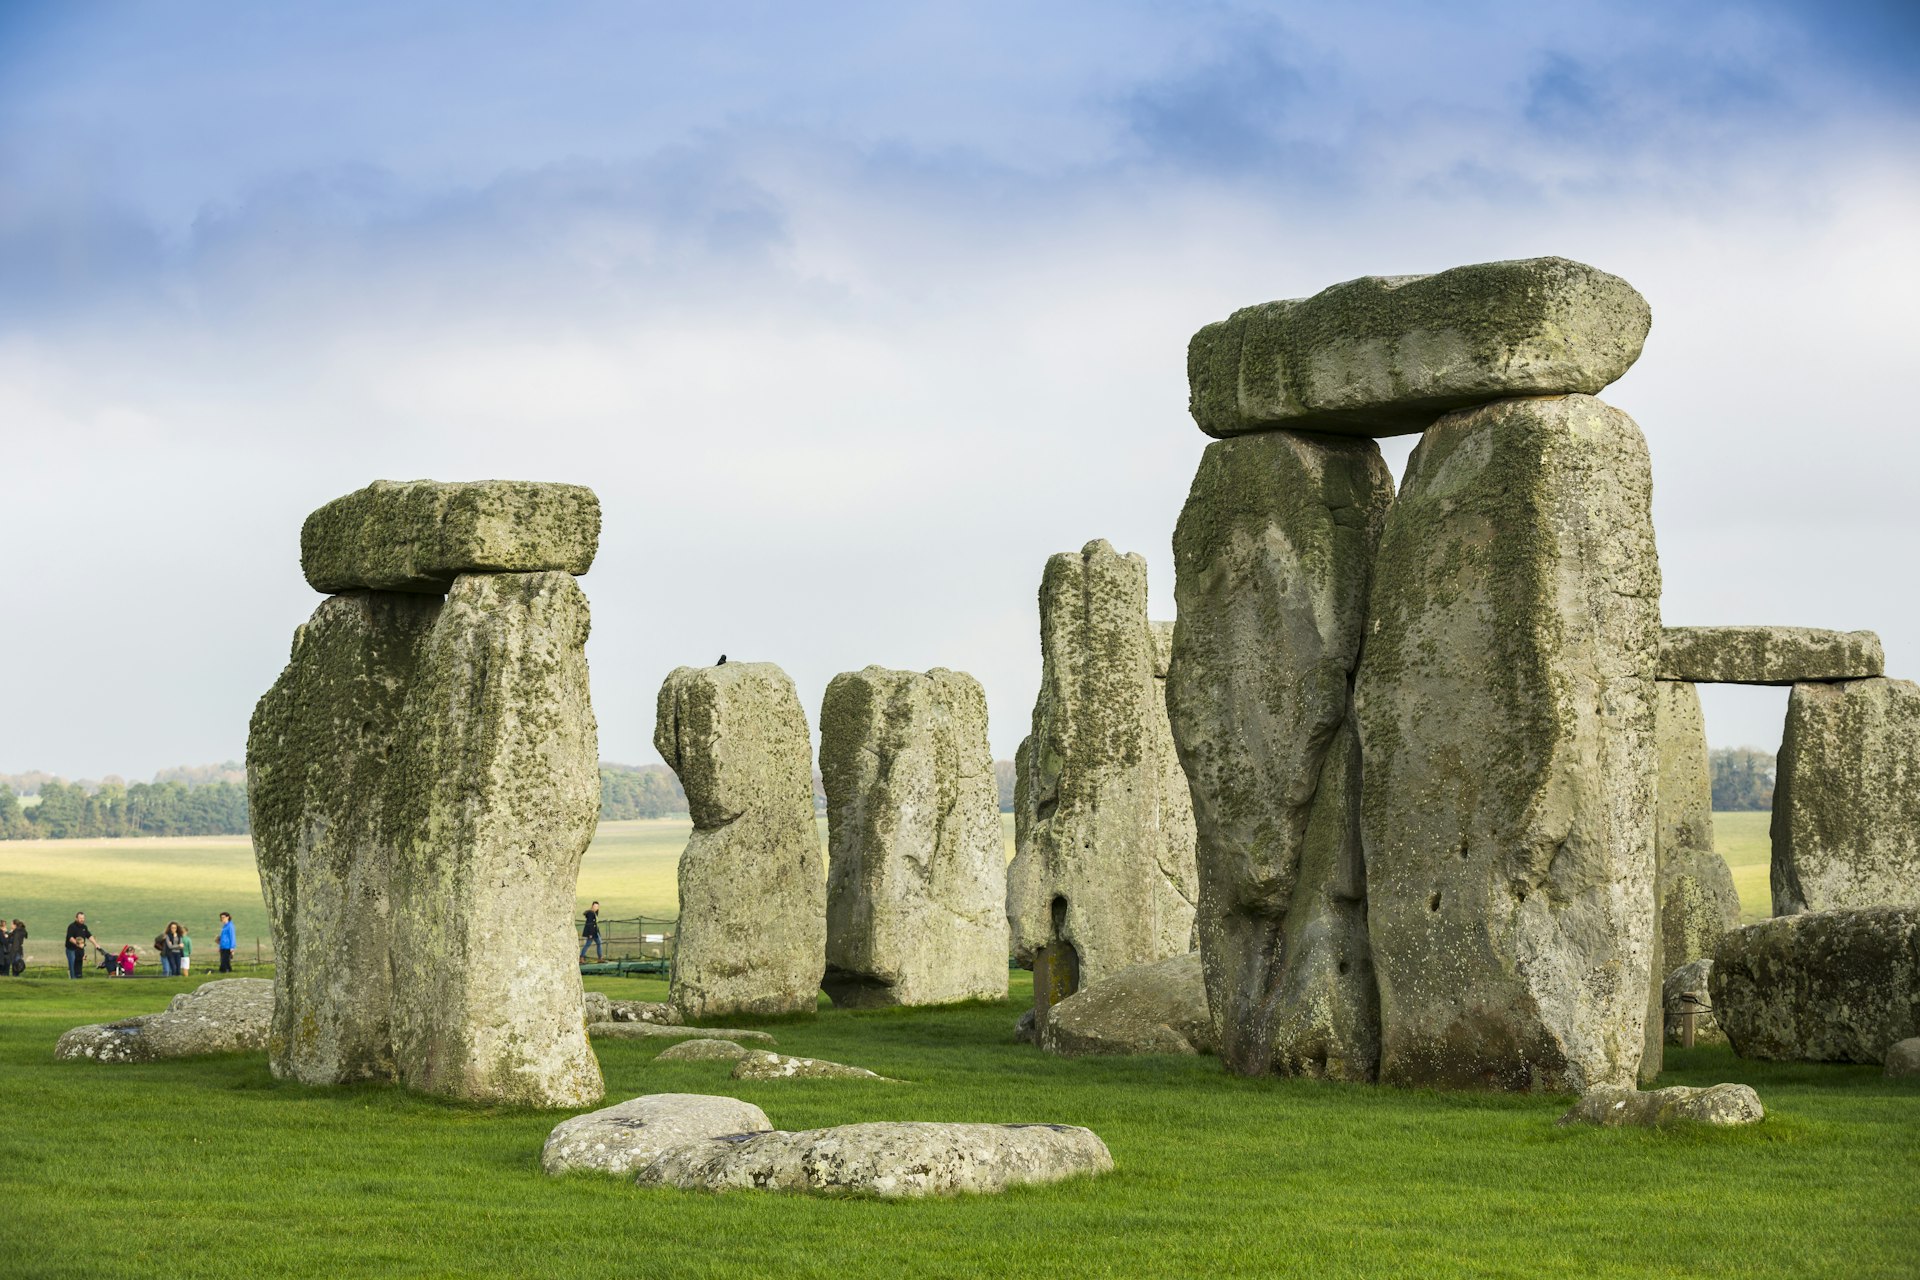 A closer look at the formations of Stonehenge